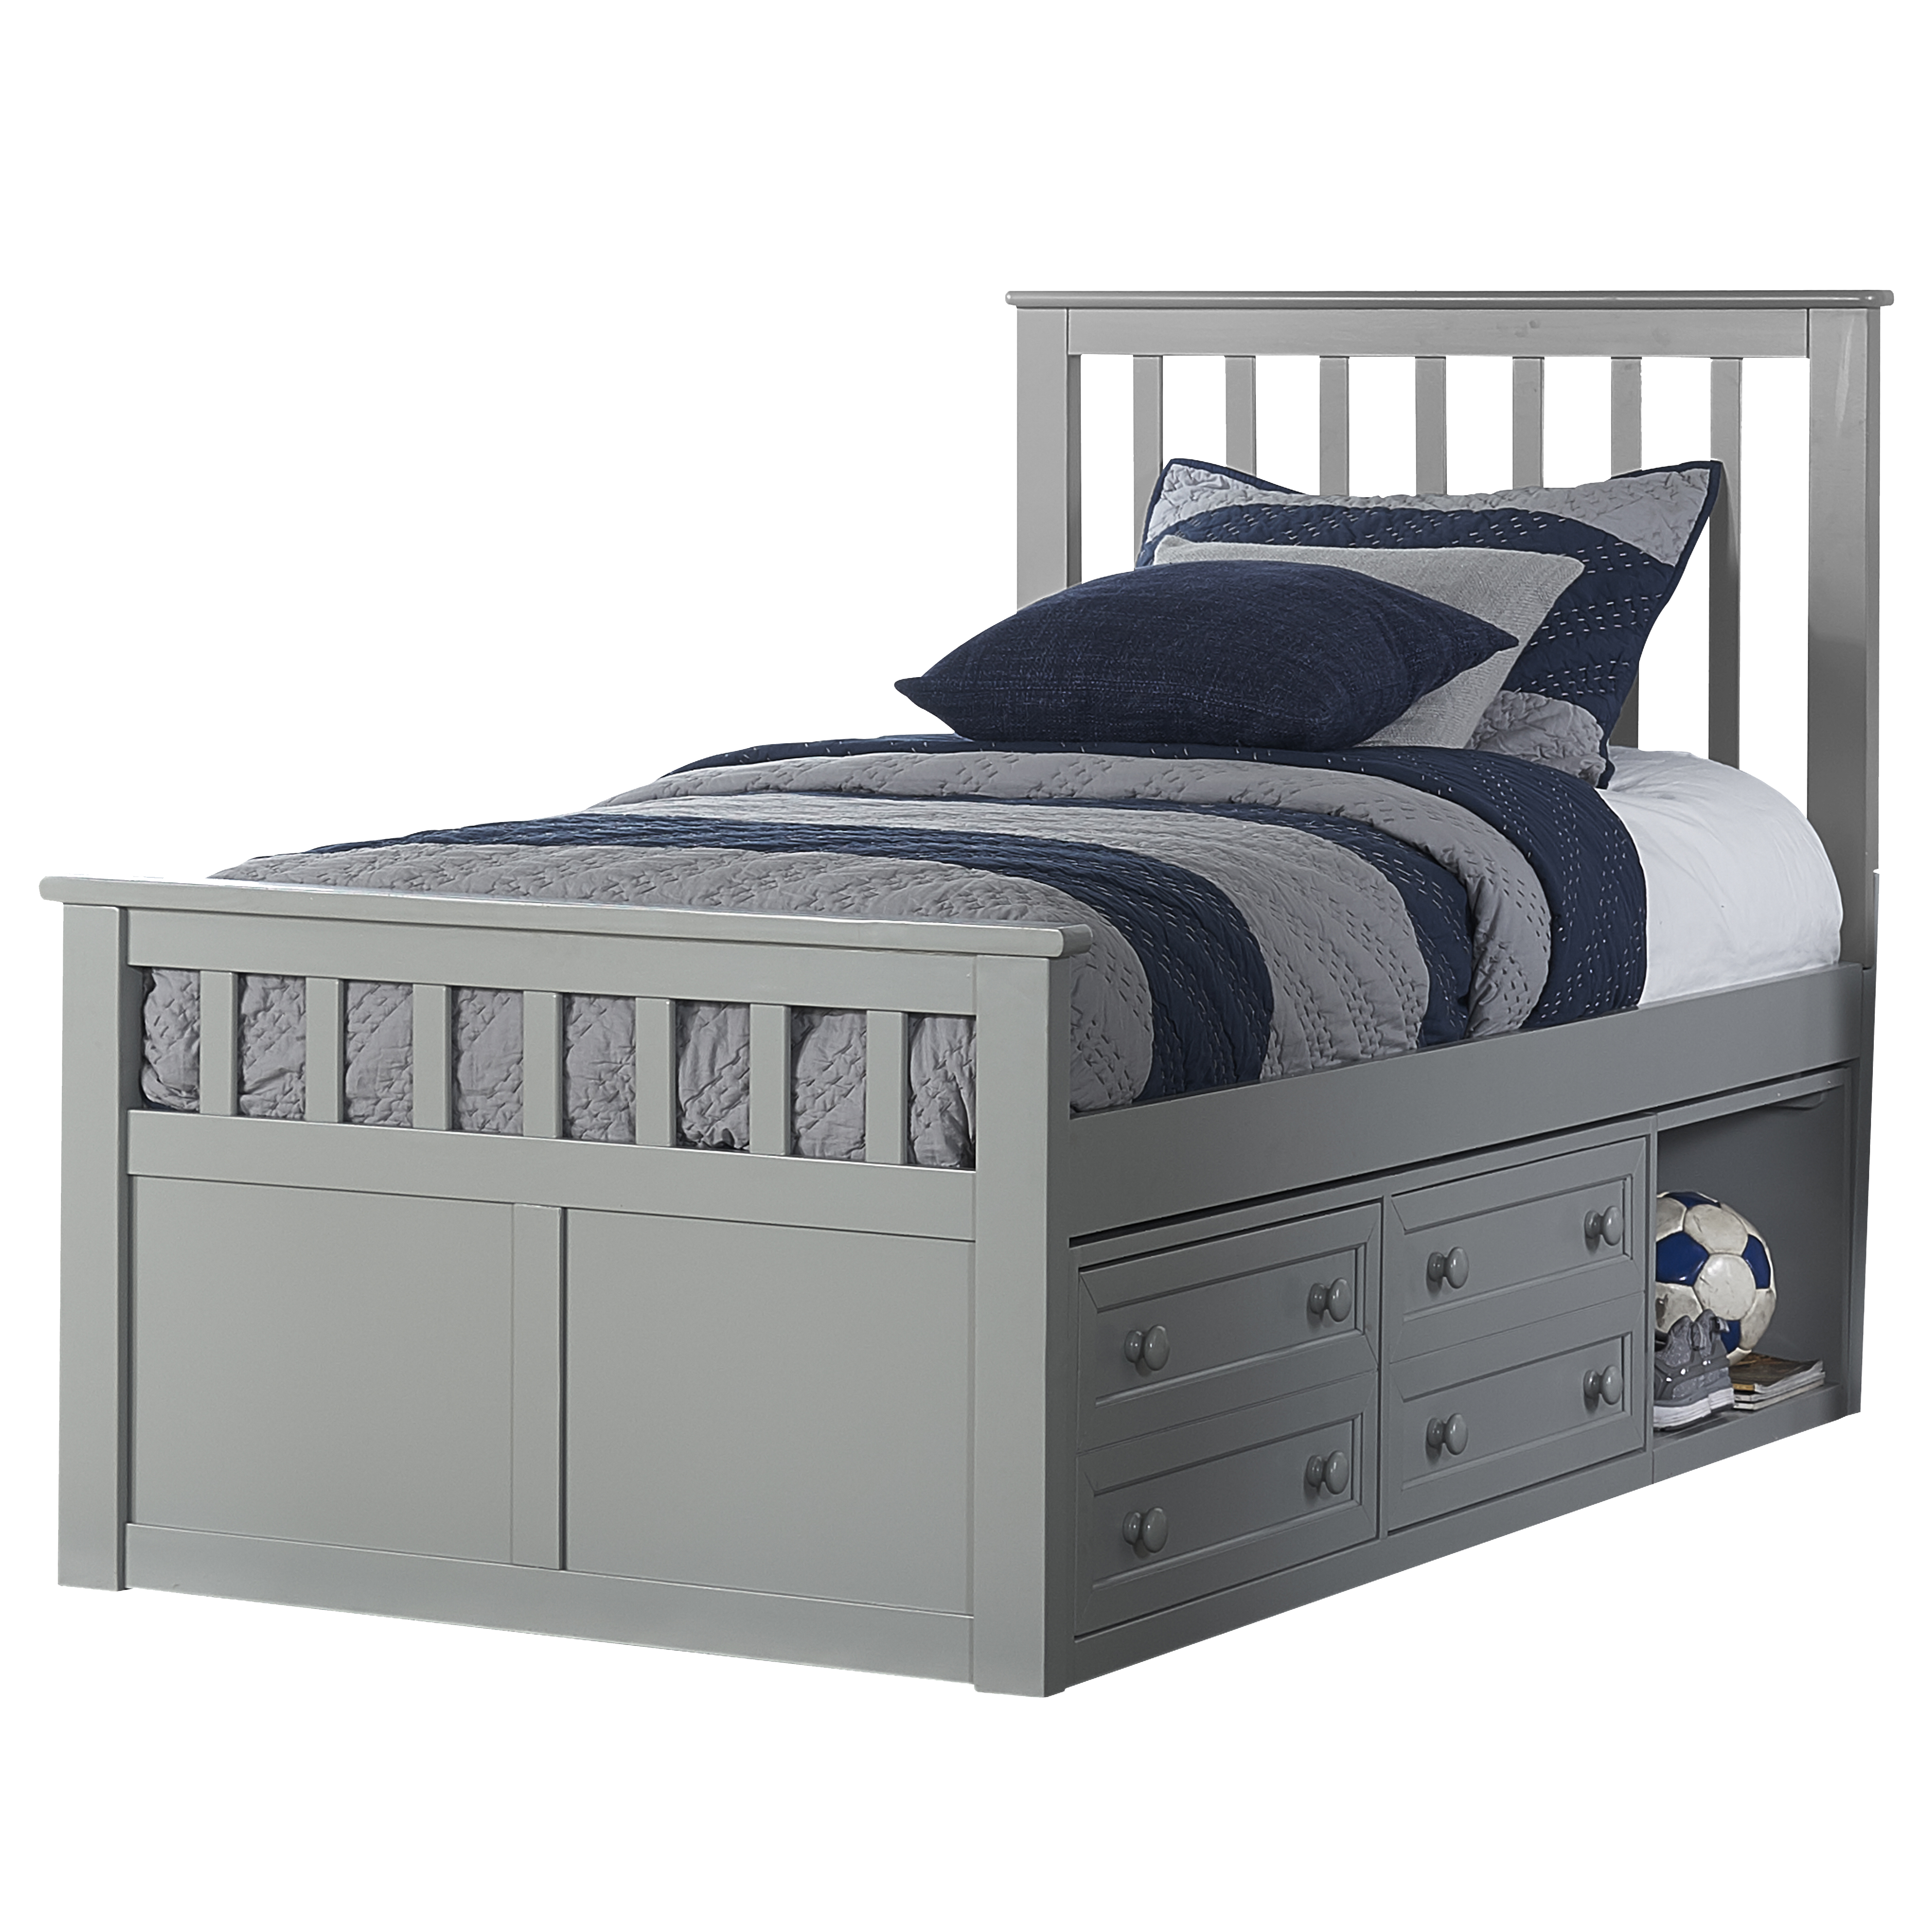 Marley Wood Captain's Bed Accessories and Part with Storage